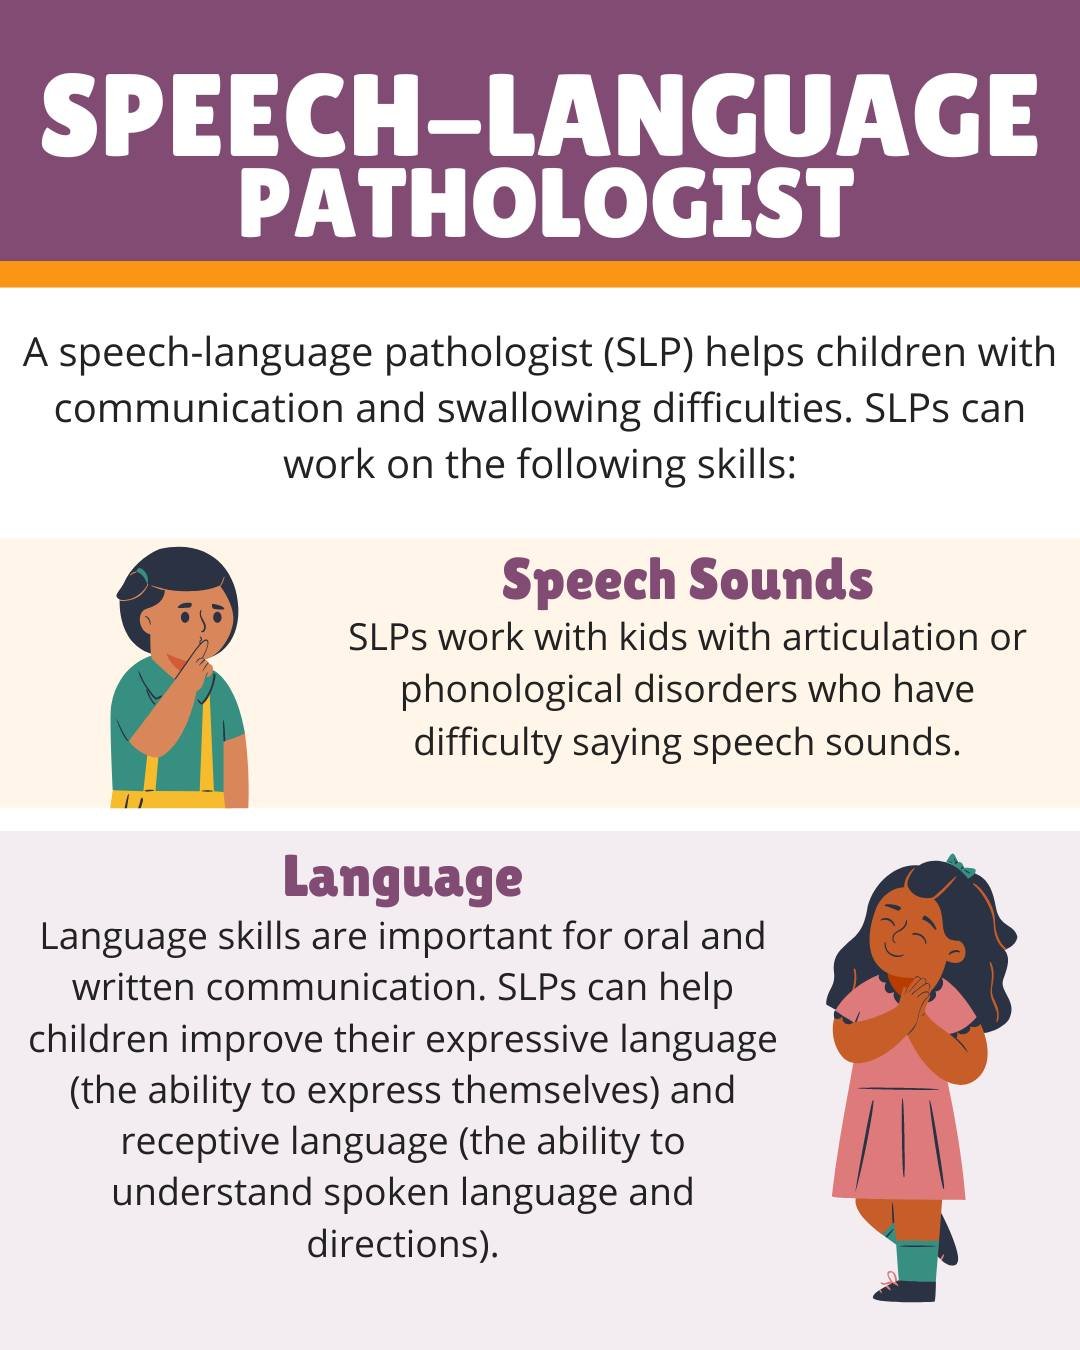 Love this cute infographic about Speech-Language Pathology and what it can help with!  If you want more information on whether or not it is the right path to take, Belinda offers a 15-minute Meet for Fit for all your questions!
Book online at https:/